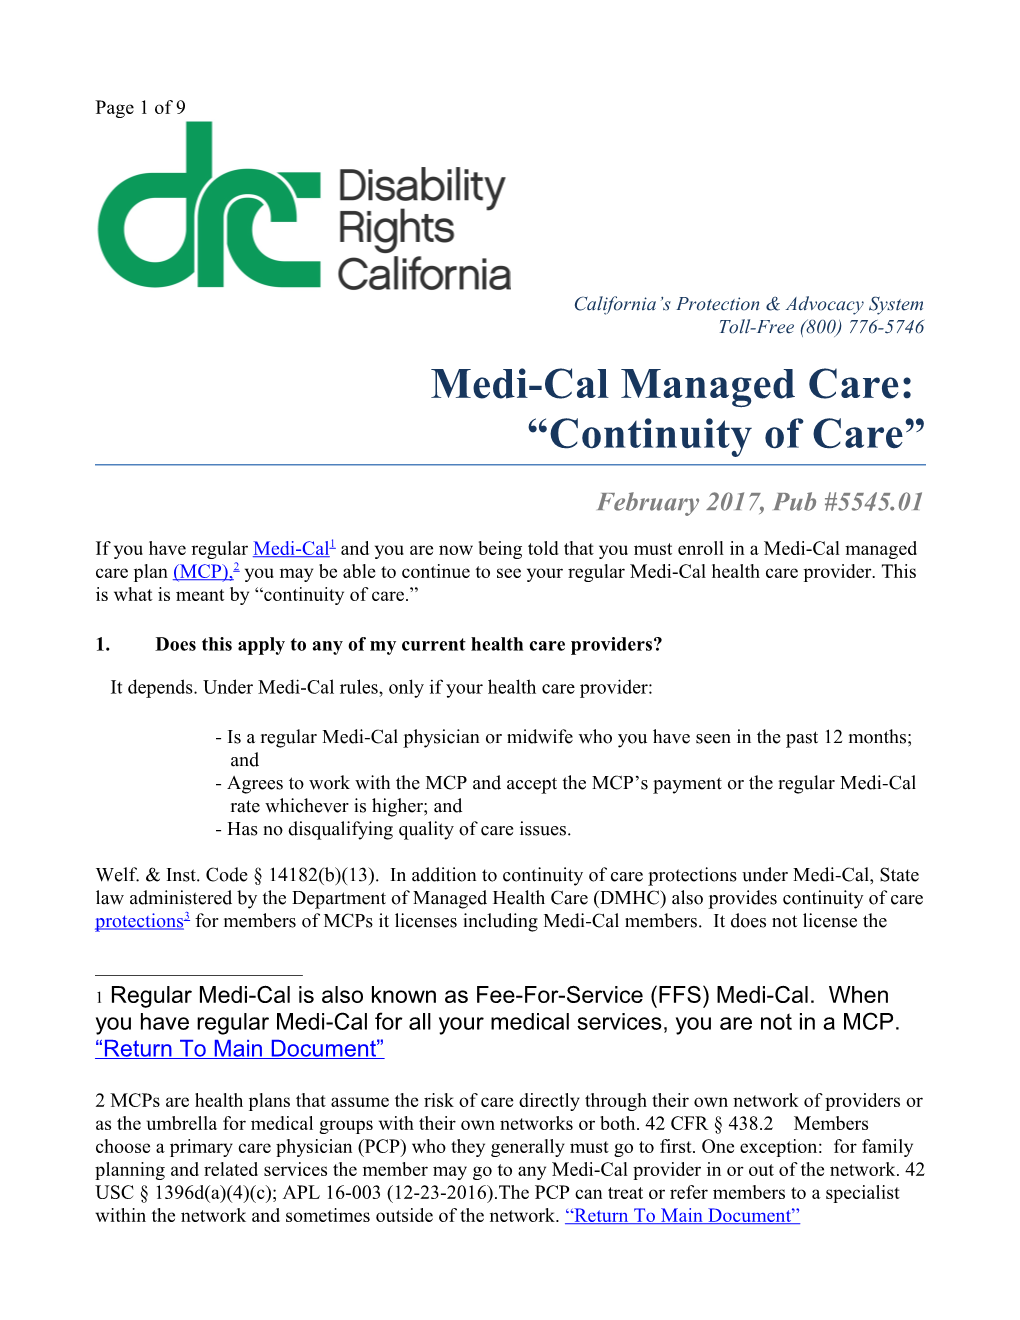 Medi-Cal Managed Care: Continuity of Care